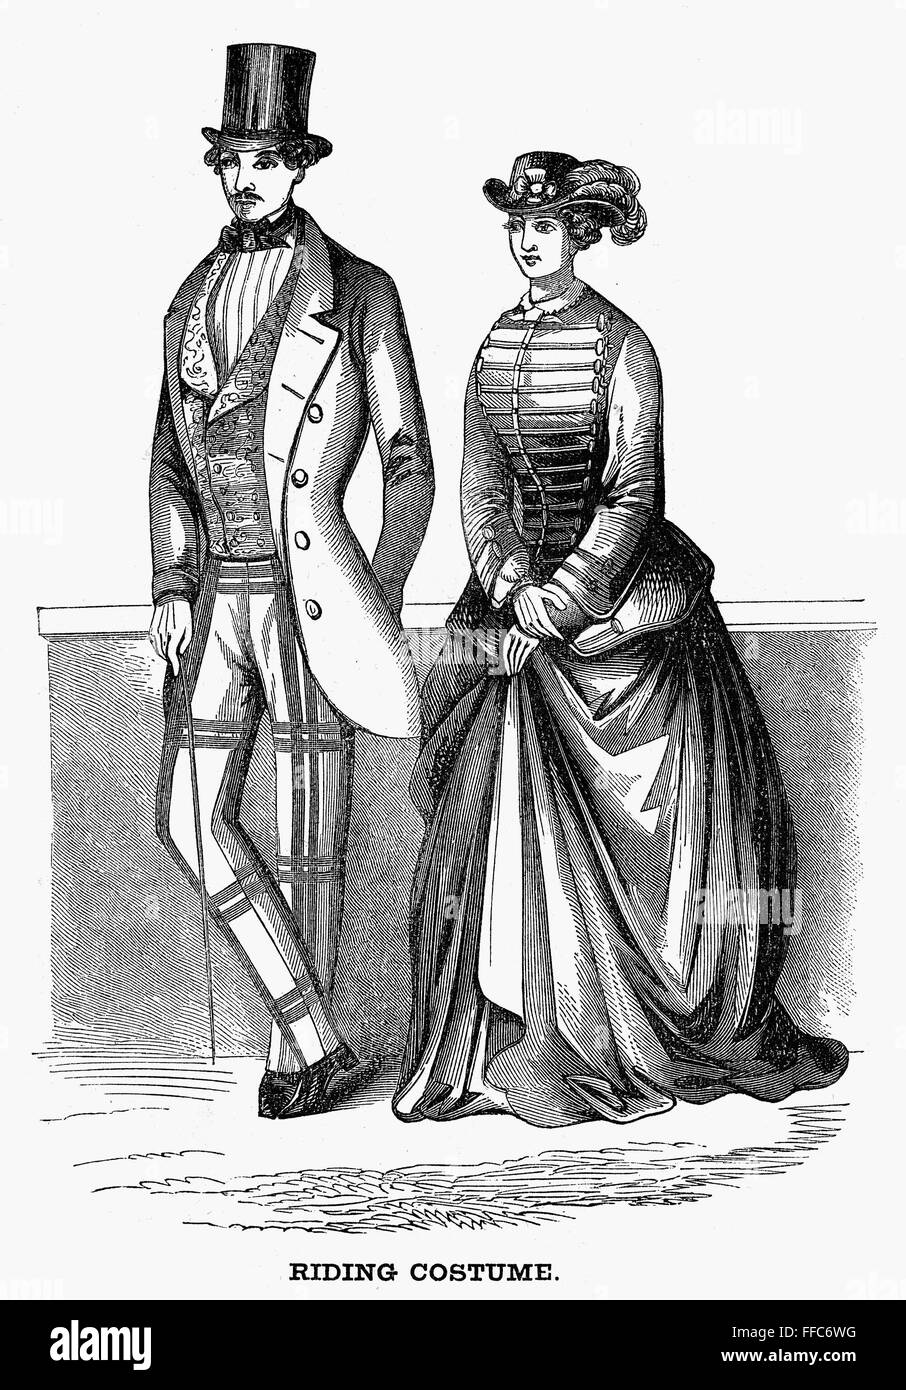 RIDING COSTUMES, 1853. /nGentleman's and Lady's riding costumes. Wood engraving from an English magazine of 1853. Stock Photo